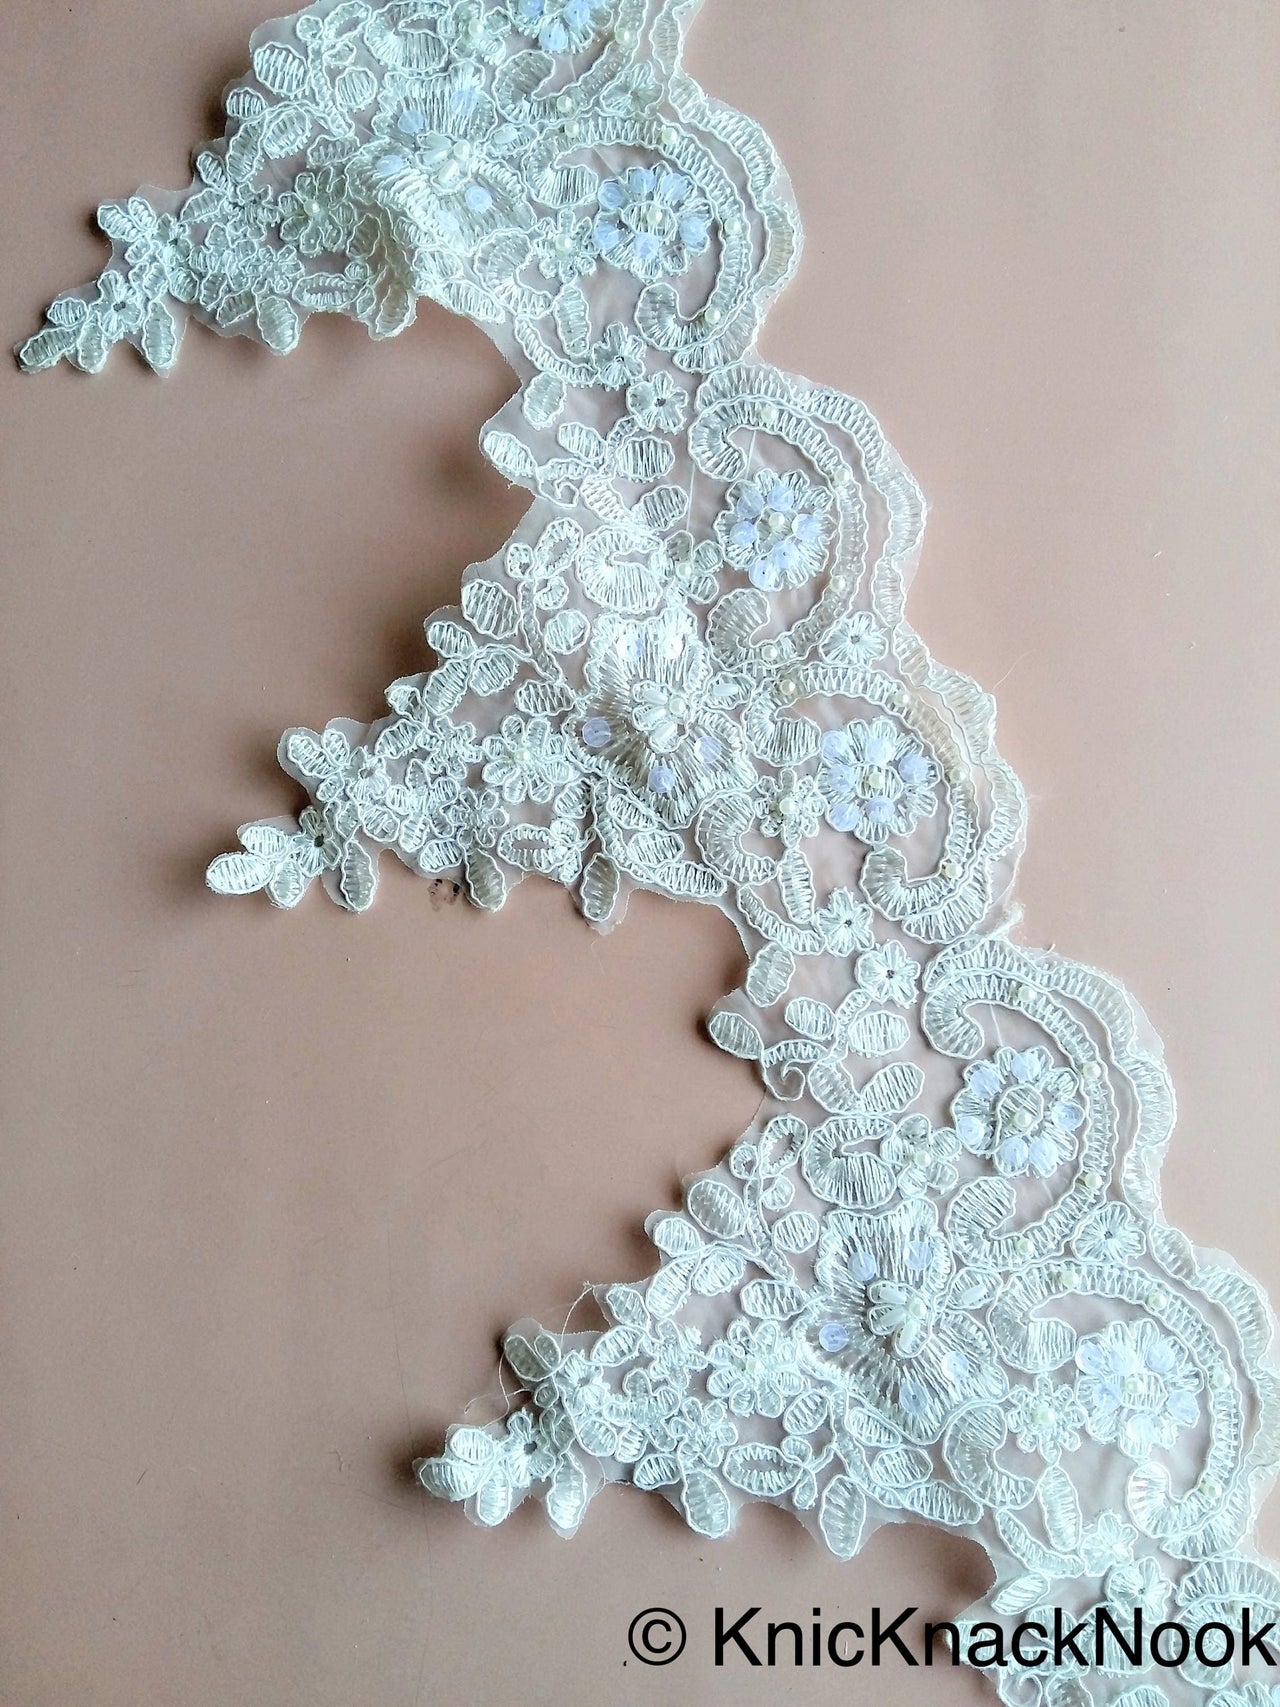 Wholesale White Embroidery Bridal Trim With White Pearls And Clear Sequins, Approx. 20 cm wide, Wedding Lace